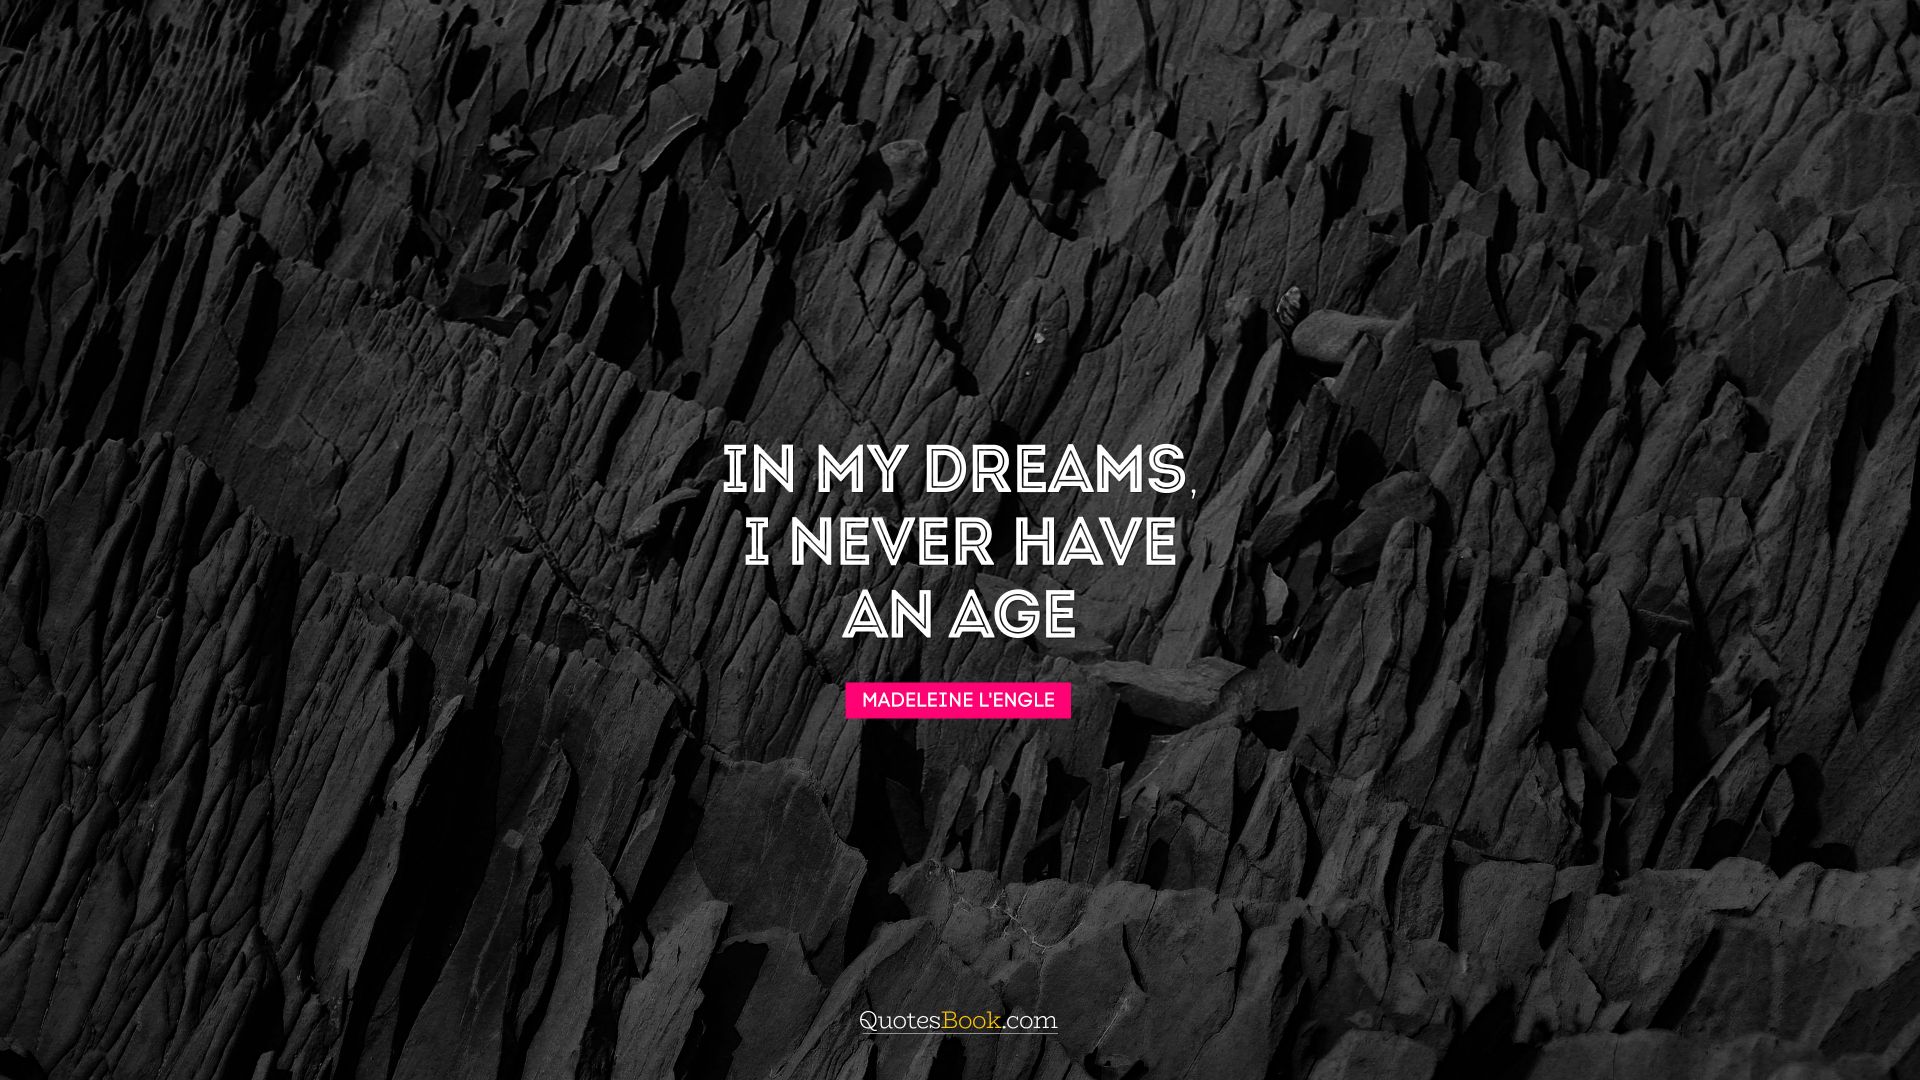 In my dreams, I never have an age. - Quote by Madeleine L'Engle